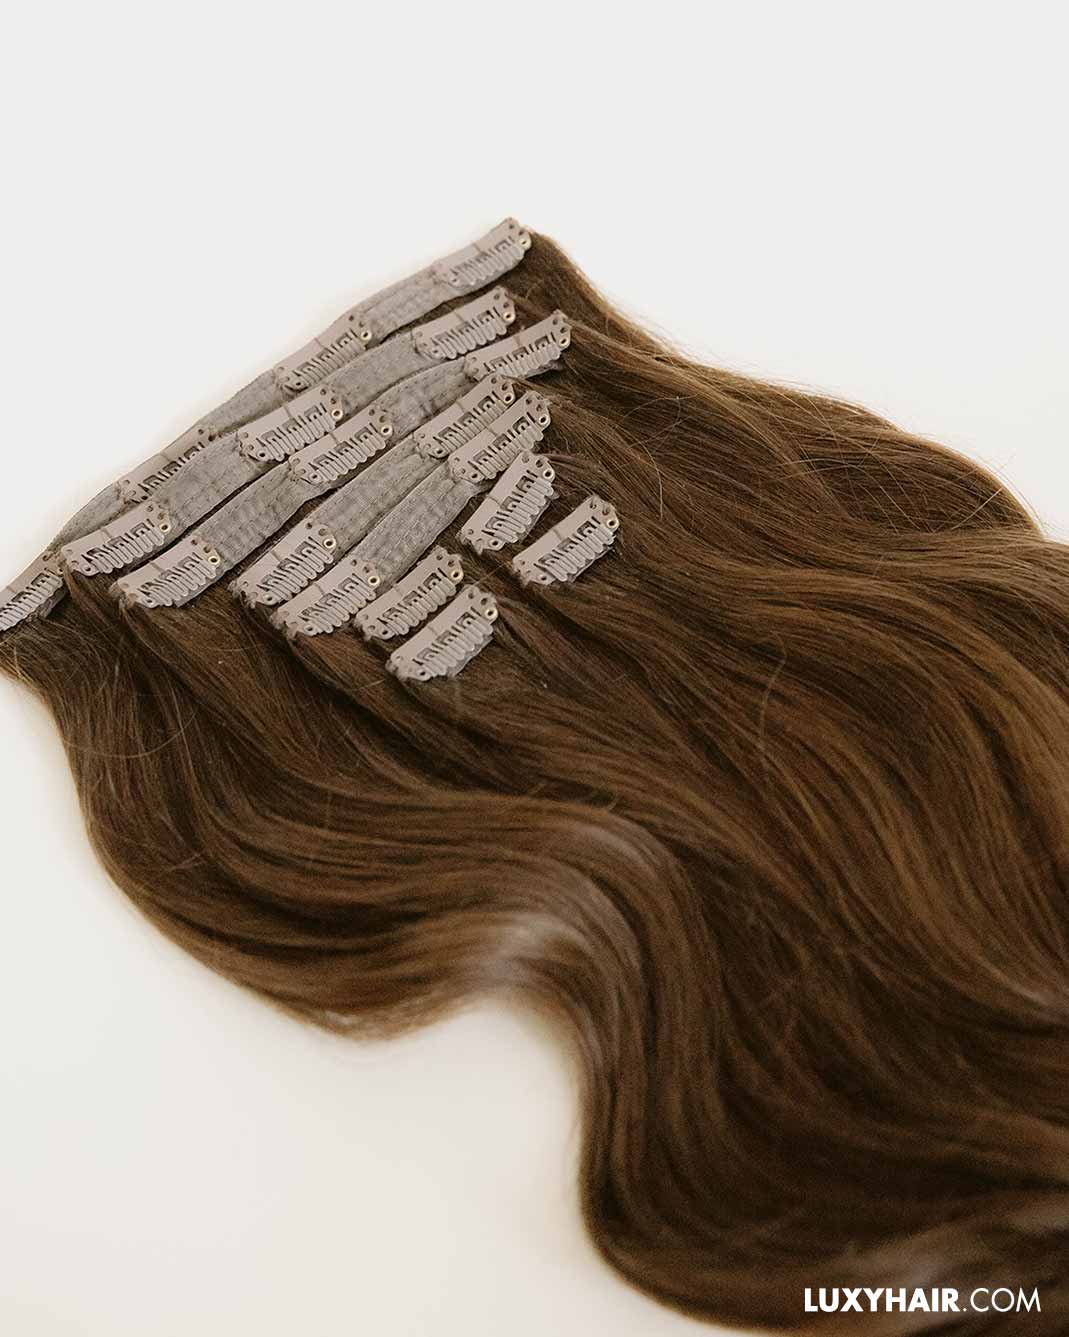 10 PCS/Set Hair Extension Clips Snap Metal Clips With Silicone Back For  Clip in Human Hair Extensions Wig Comb Clips